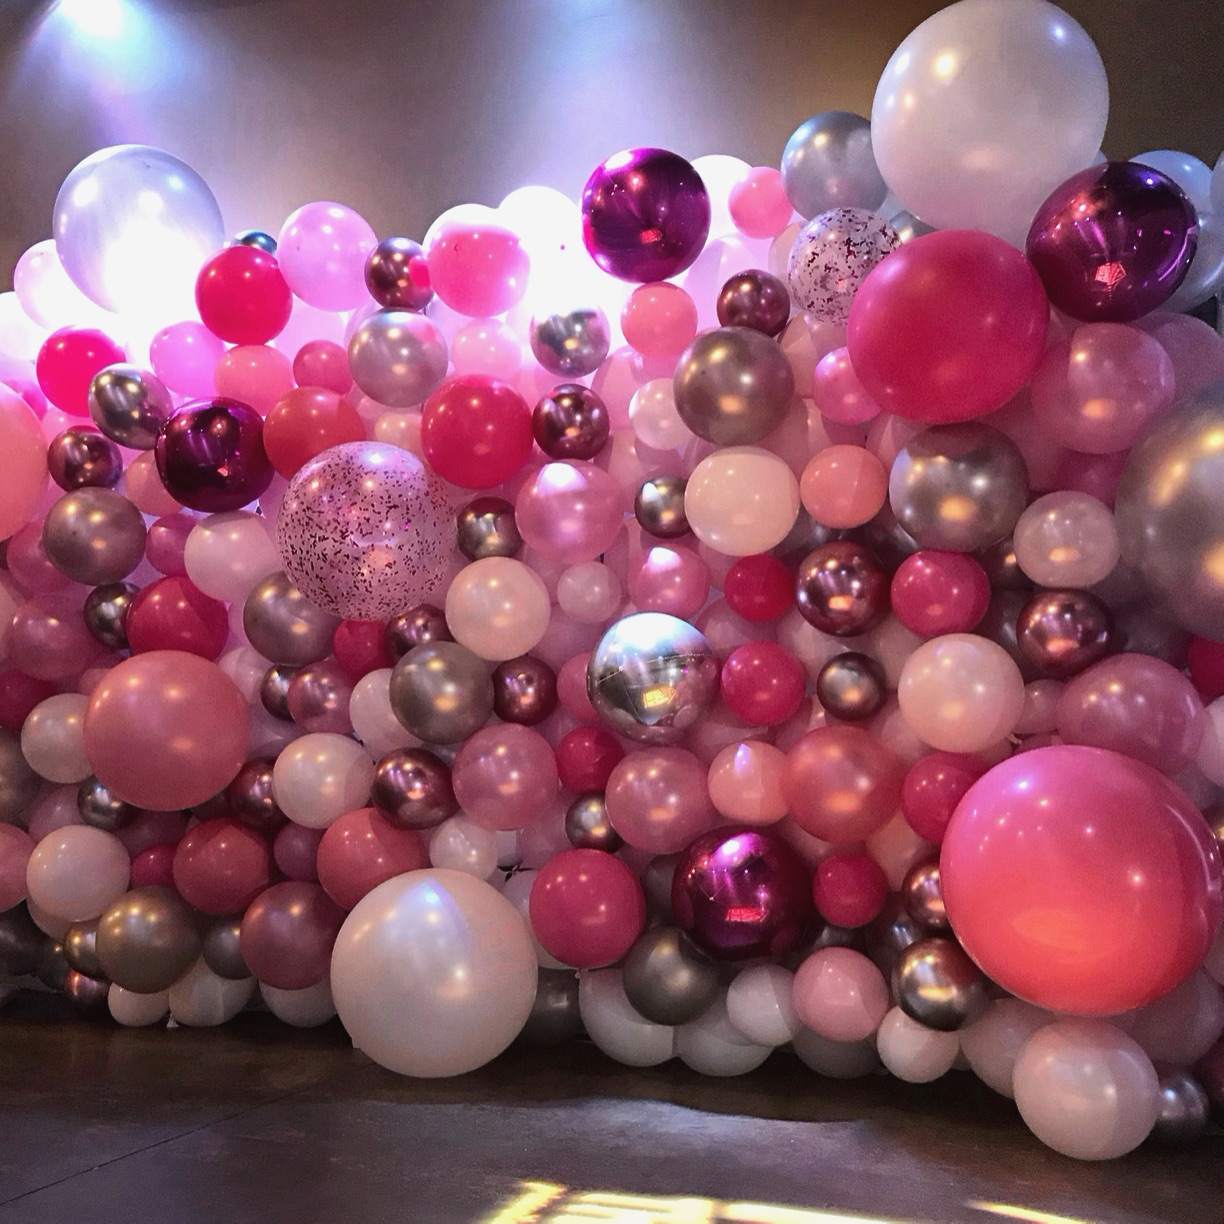 Balloons in multiple shades of pink with white and chrome silver organic balloon wall.